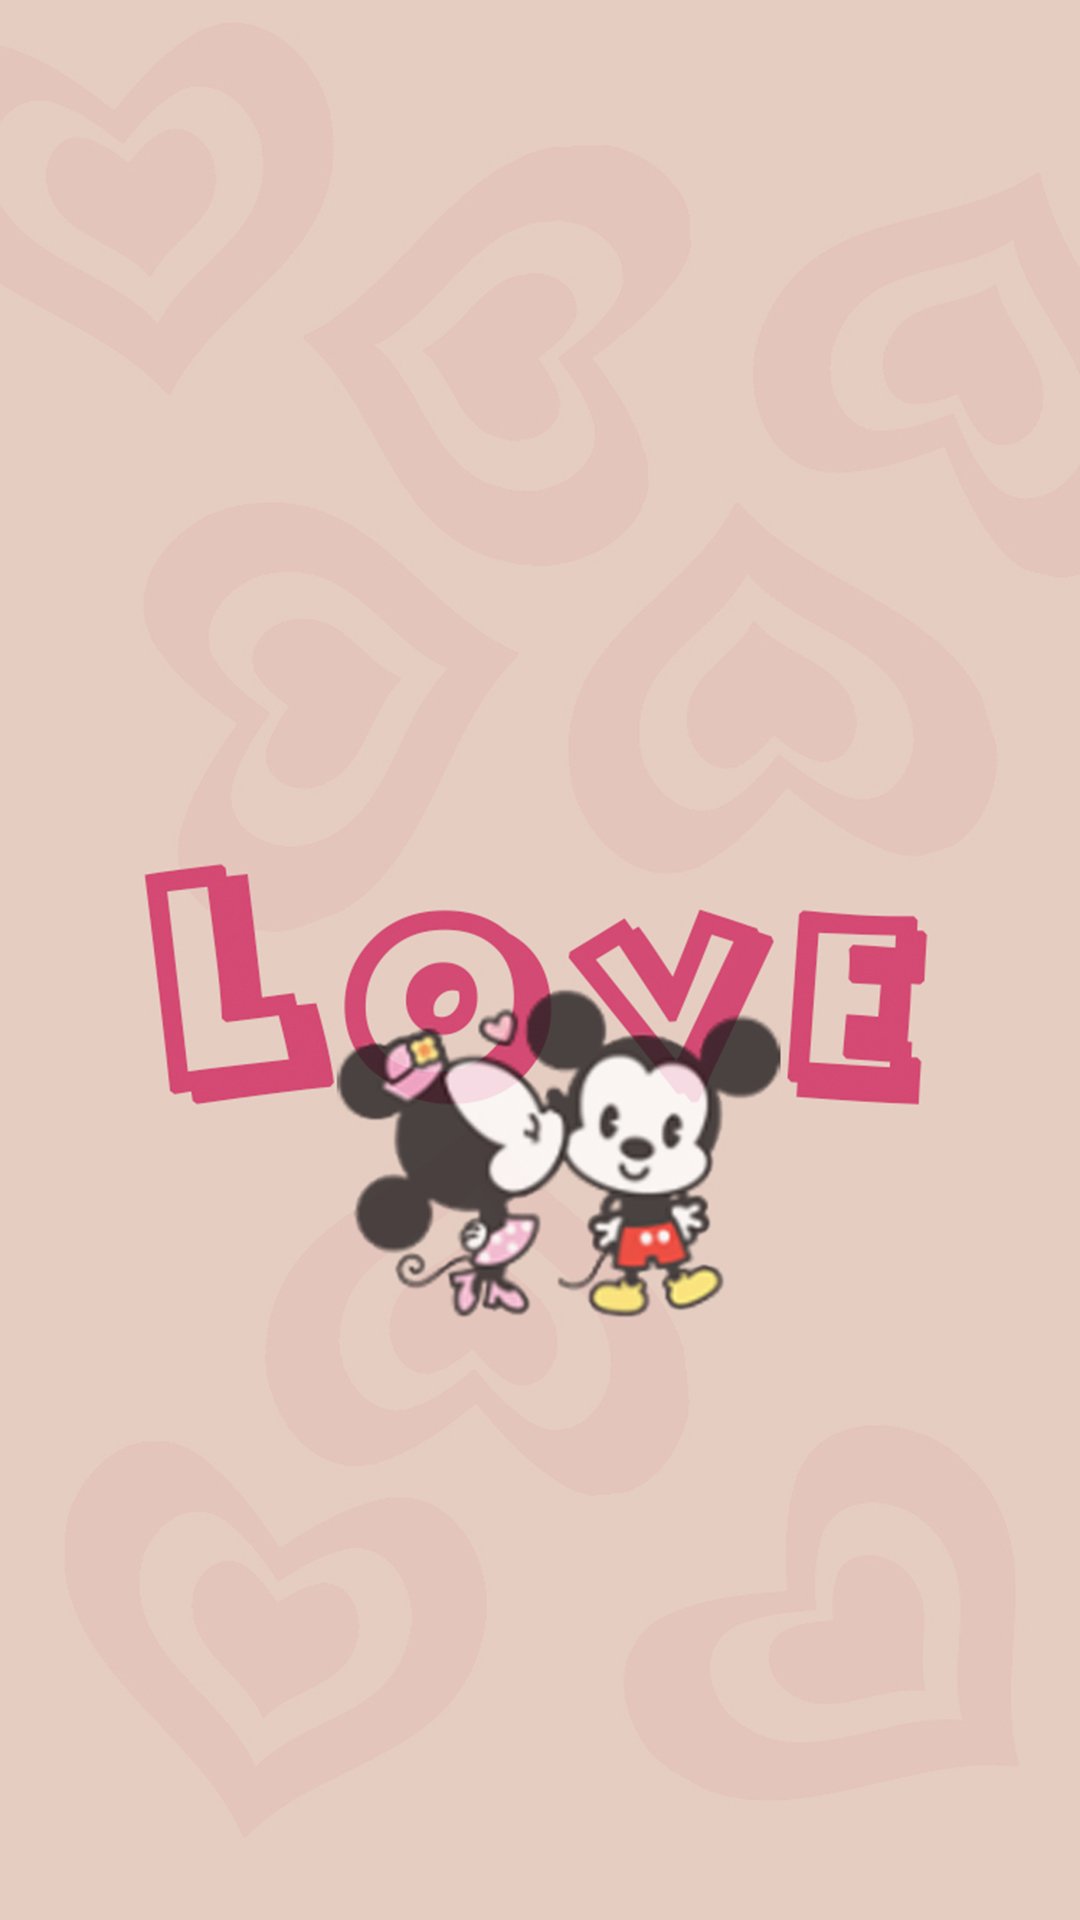 A wallpaper with two cartoon characters holding hands - Minnie Mouse